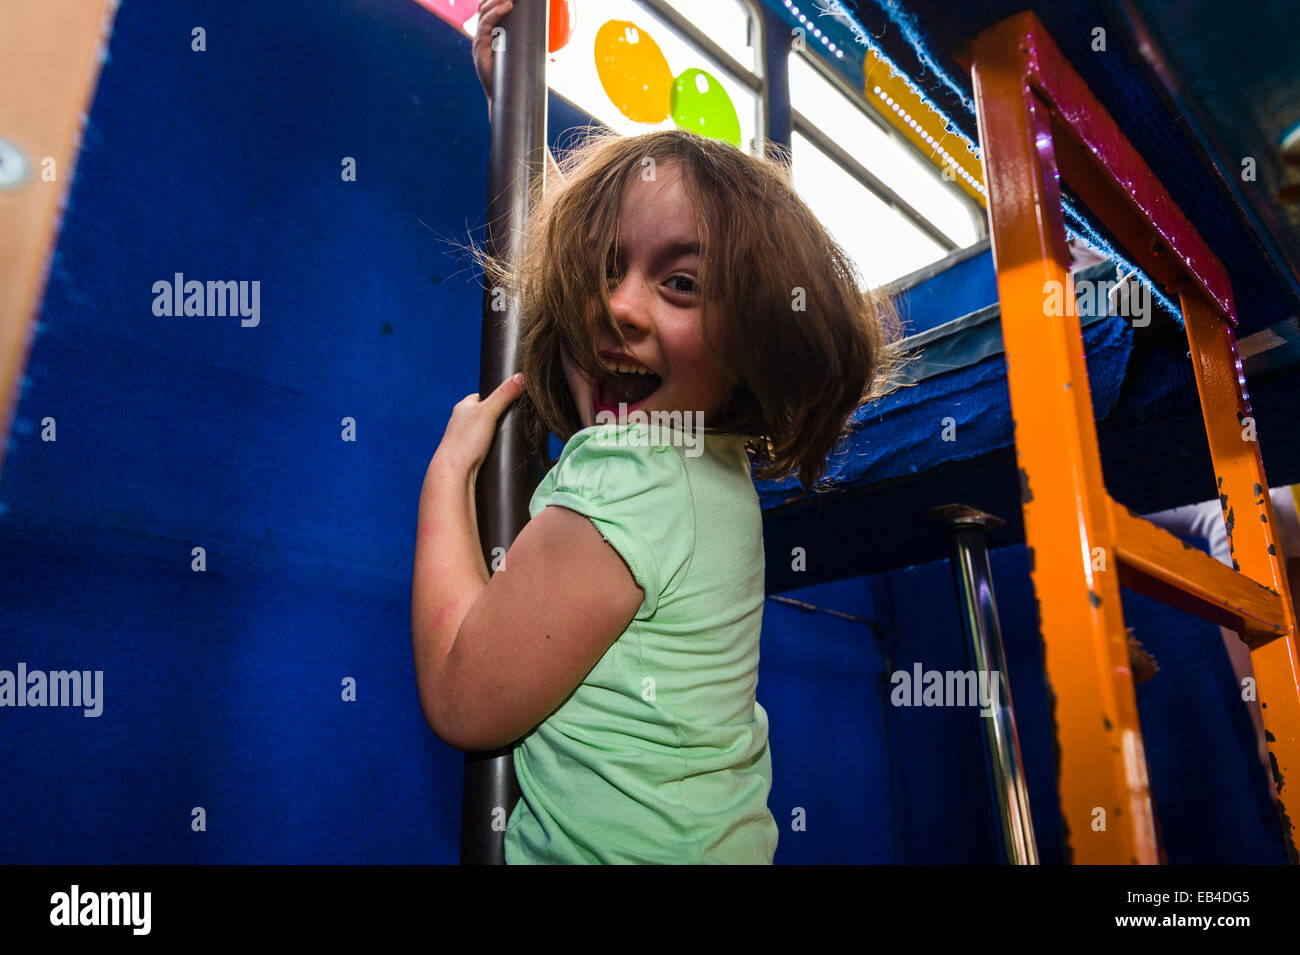 Children playing on a double-decker bus converted into a birthday party venue for gymnastic activities. Stock Photo